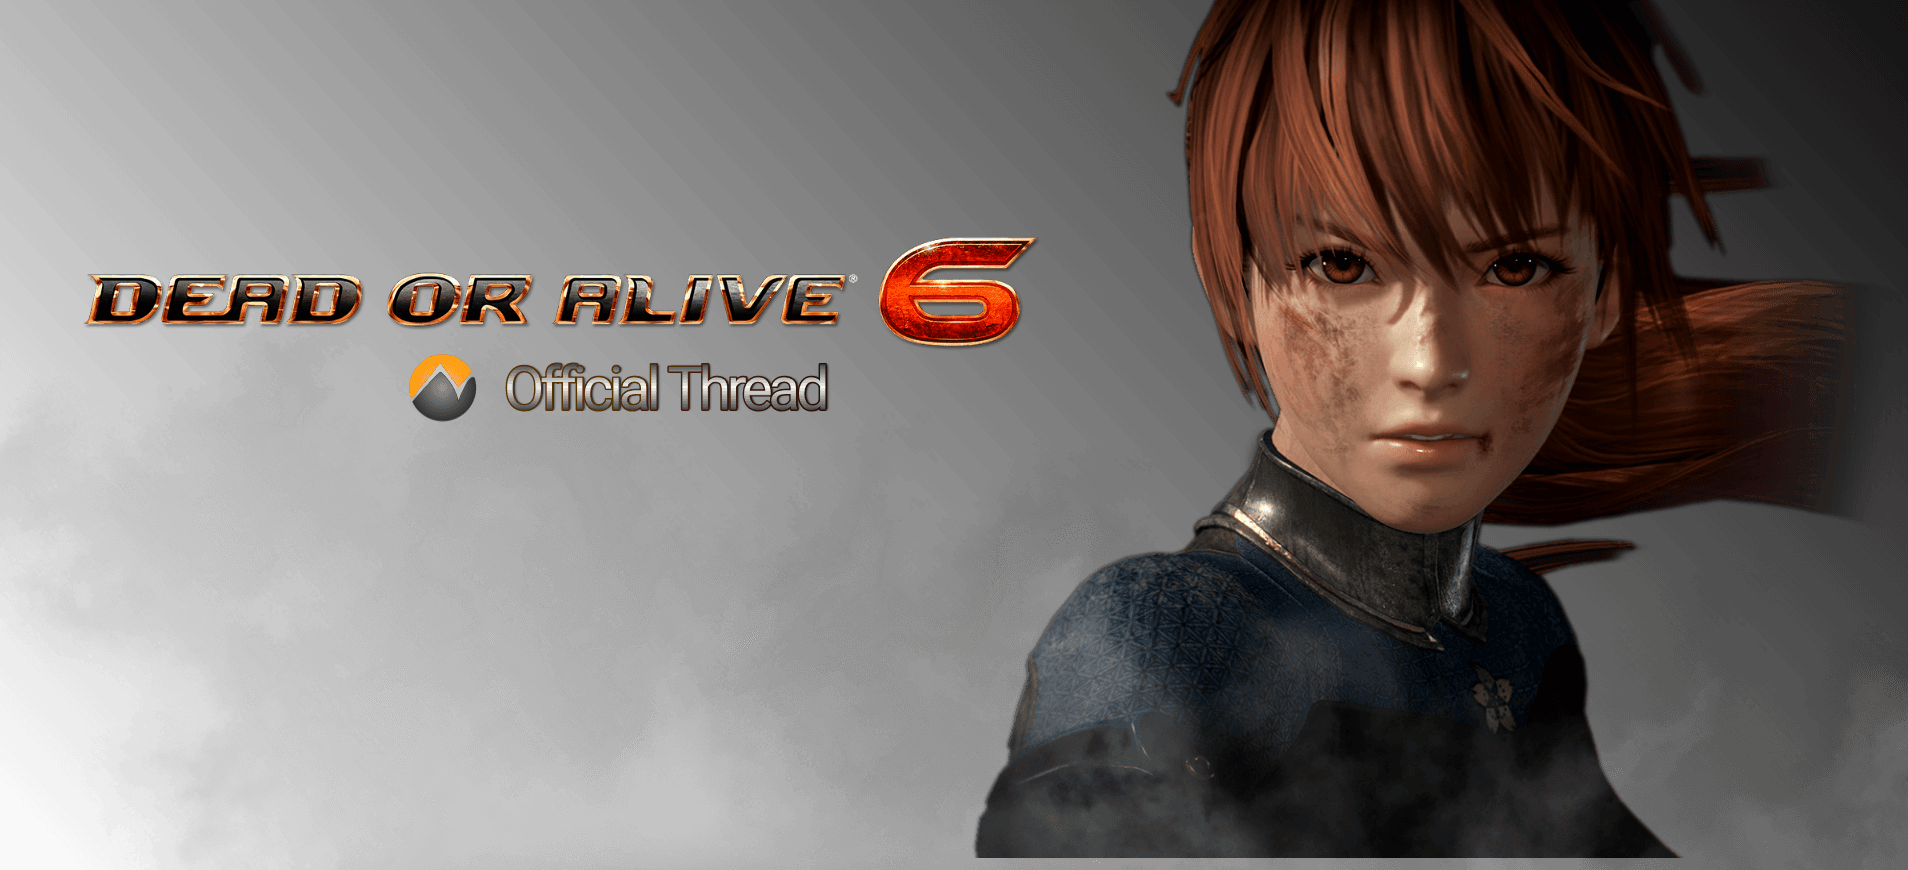 Dead or Alive 6 Xbox One Version Full Game Free Download